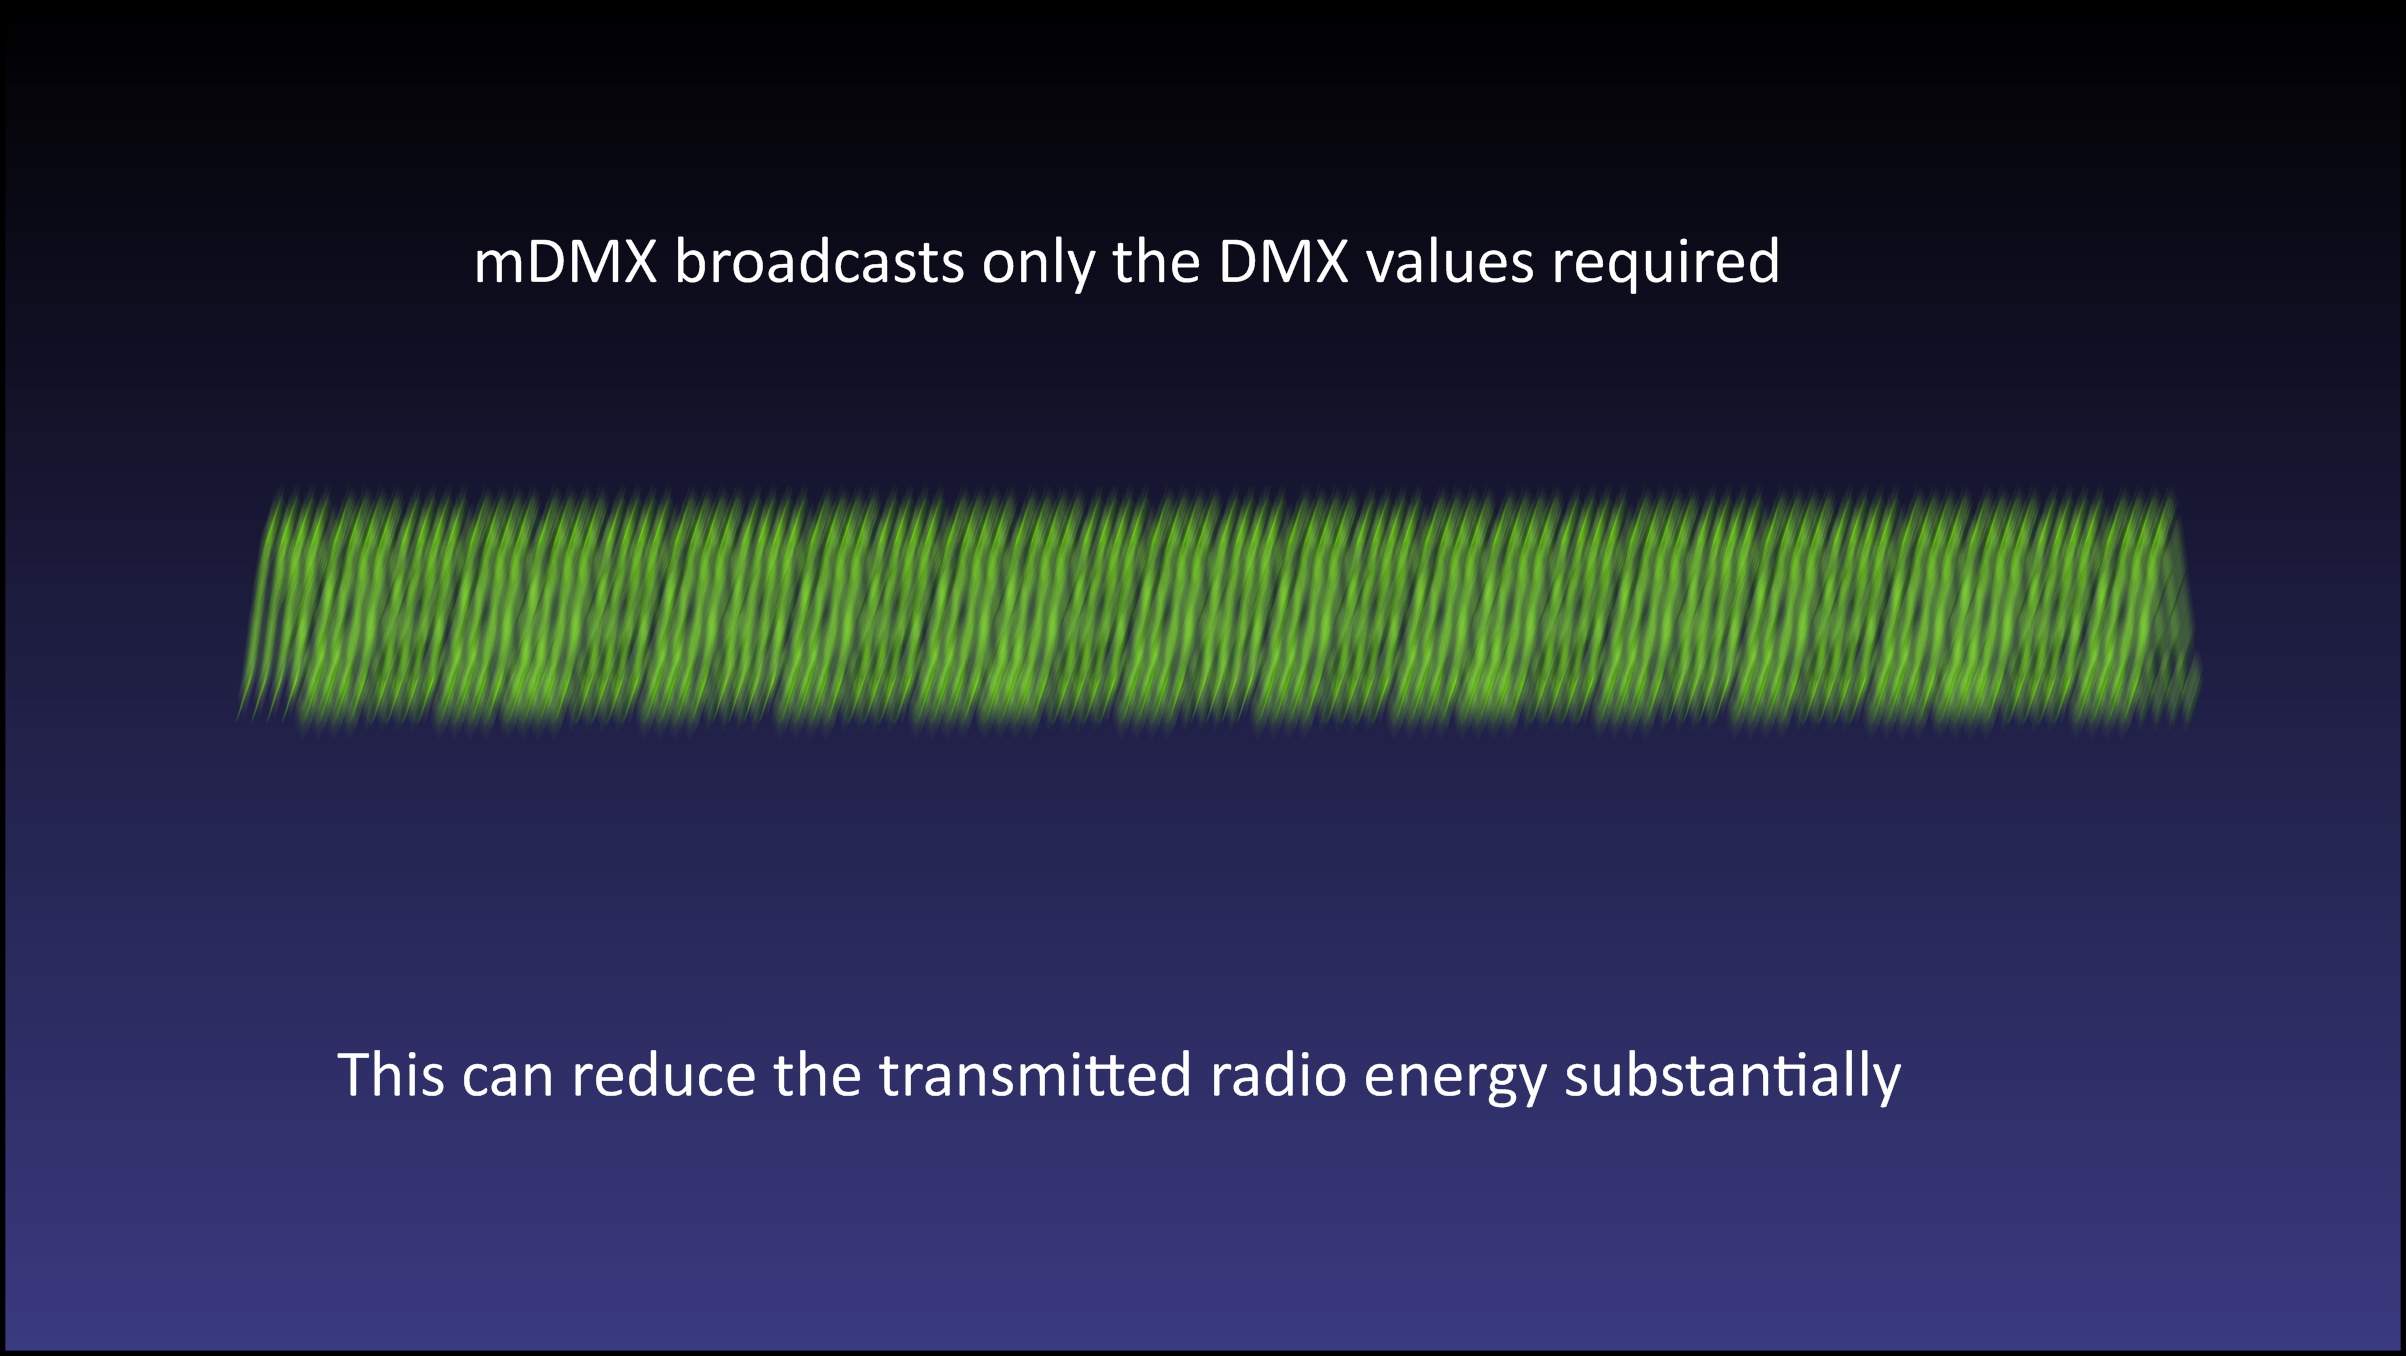 Multiverse 14 mDMX Broadcasts only the DMX Values Required